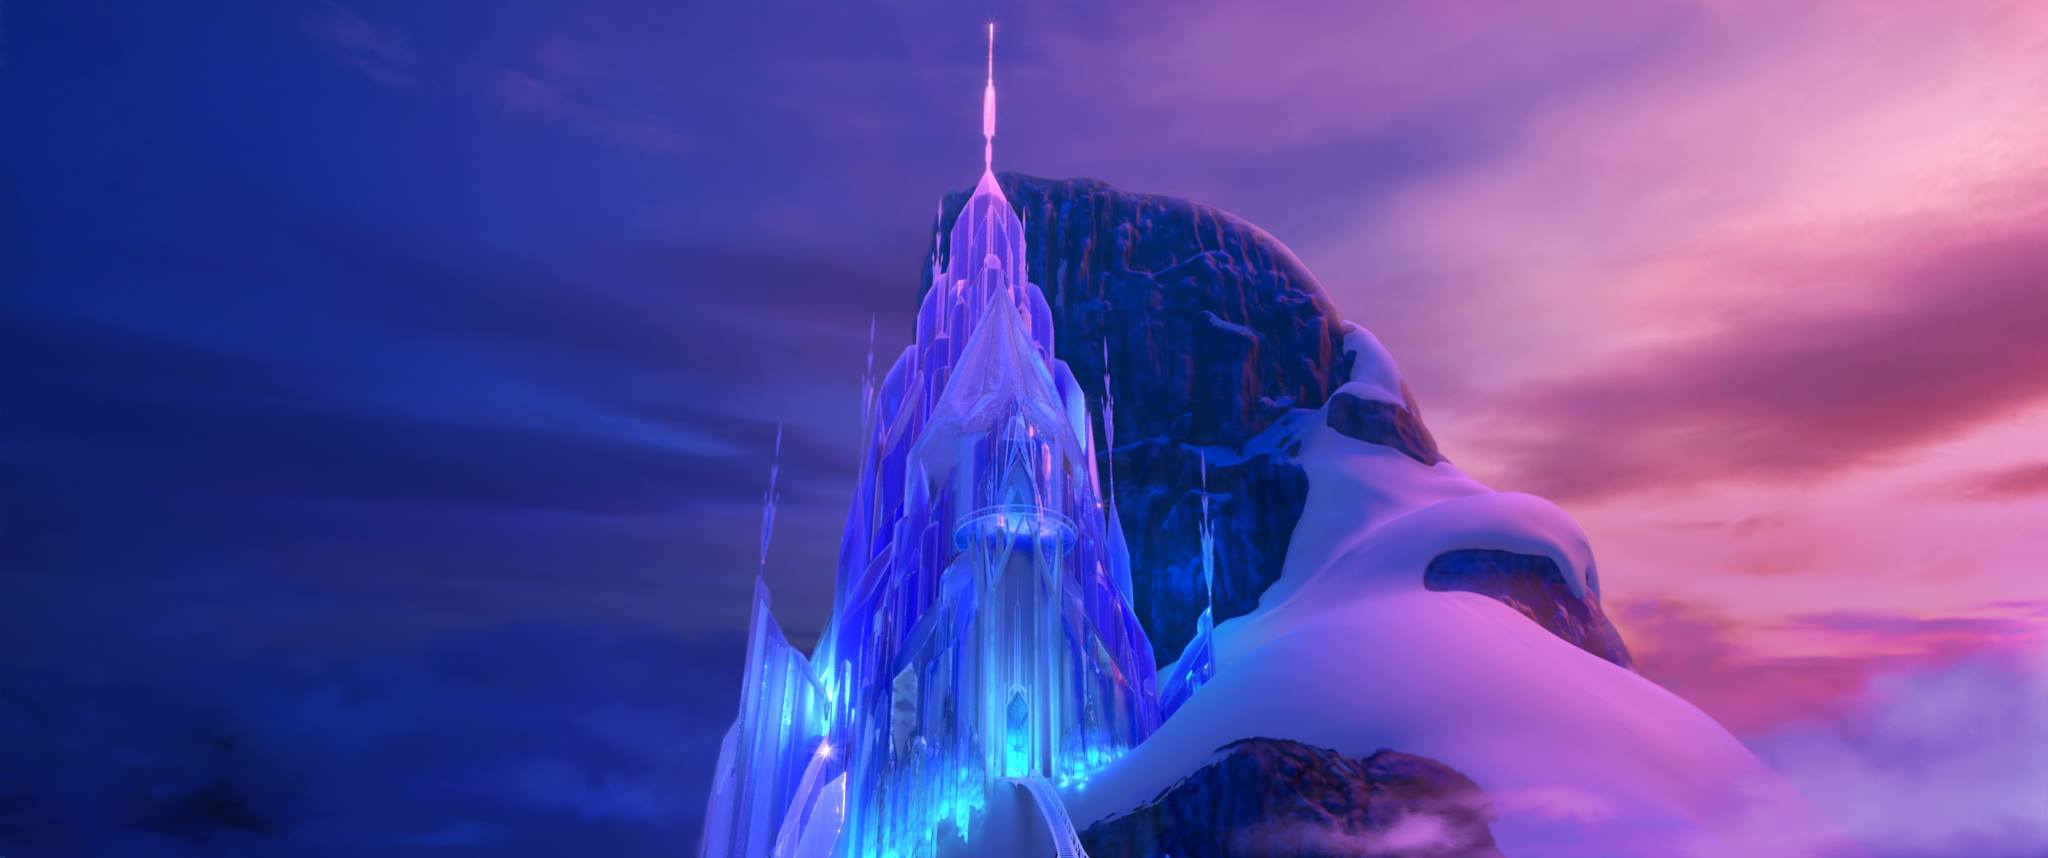 New 'Frozen' Images Show Off Elsa's Ice Palace, Arendelle &a...